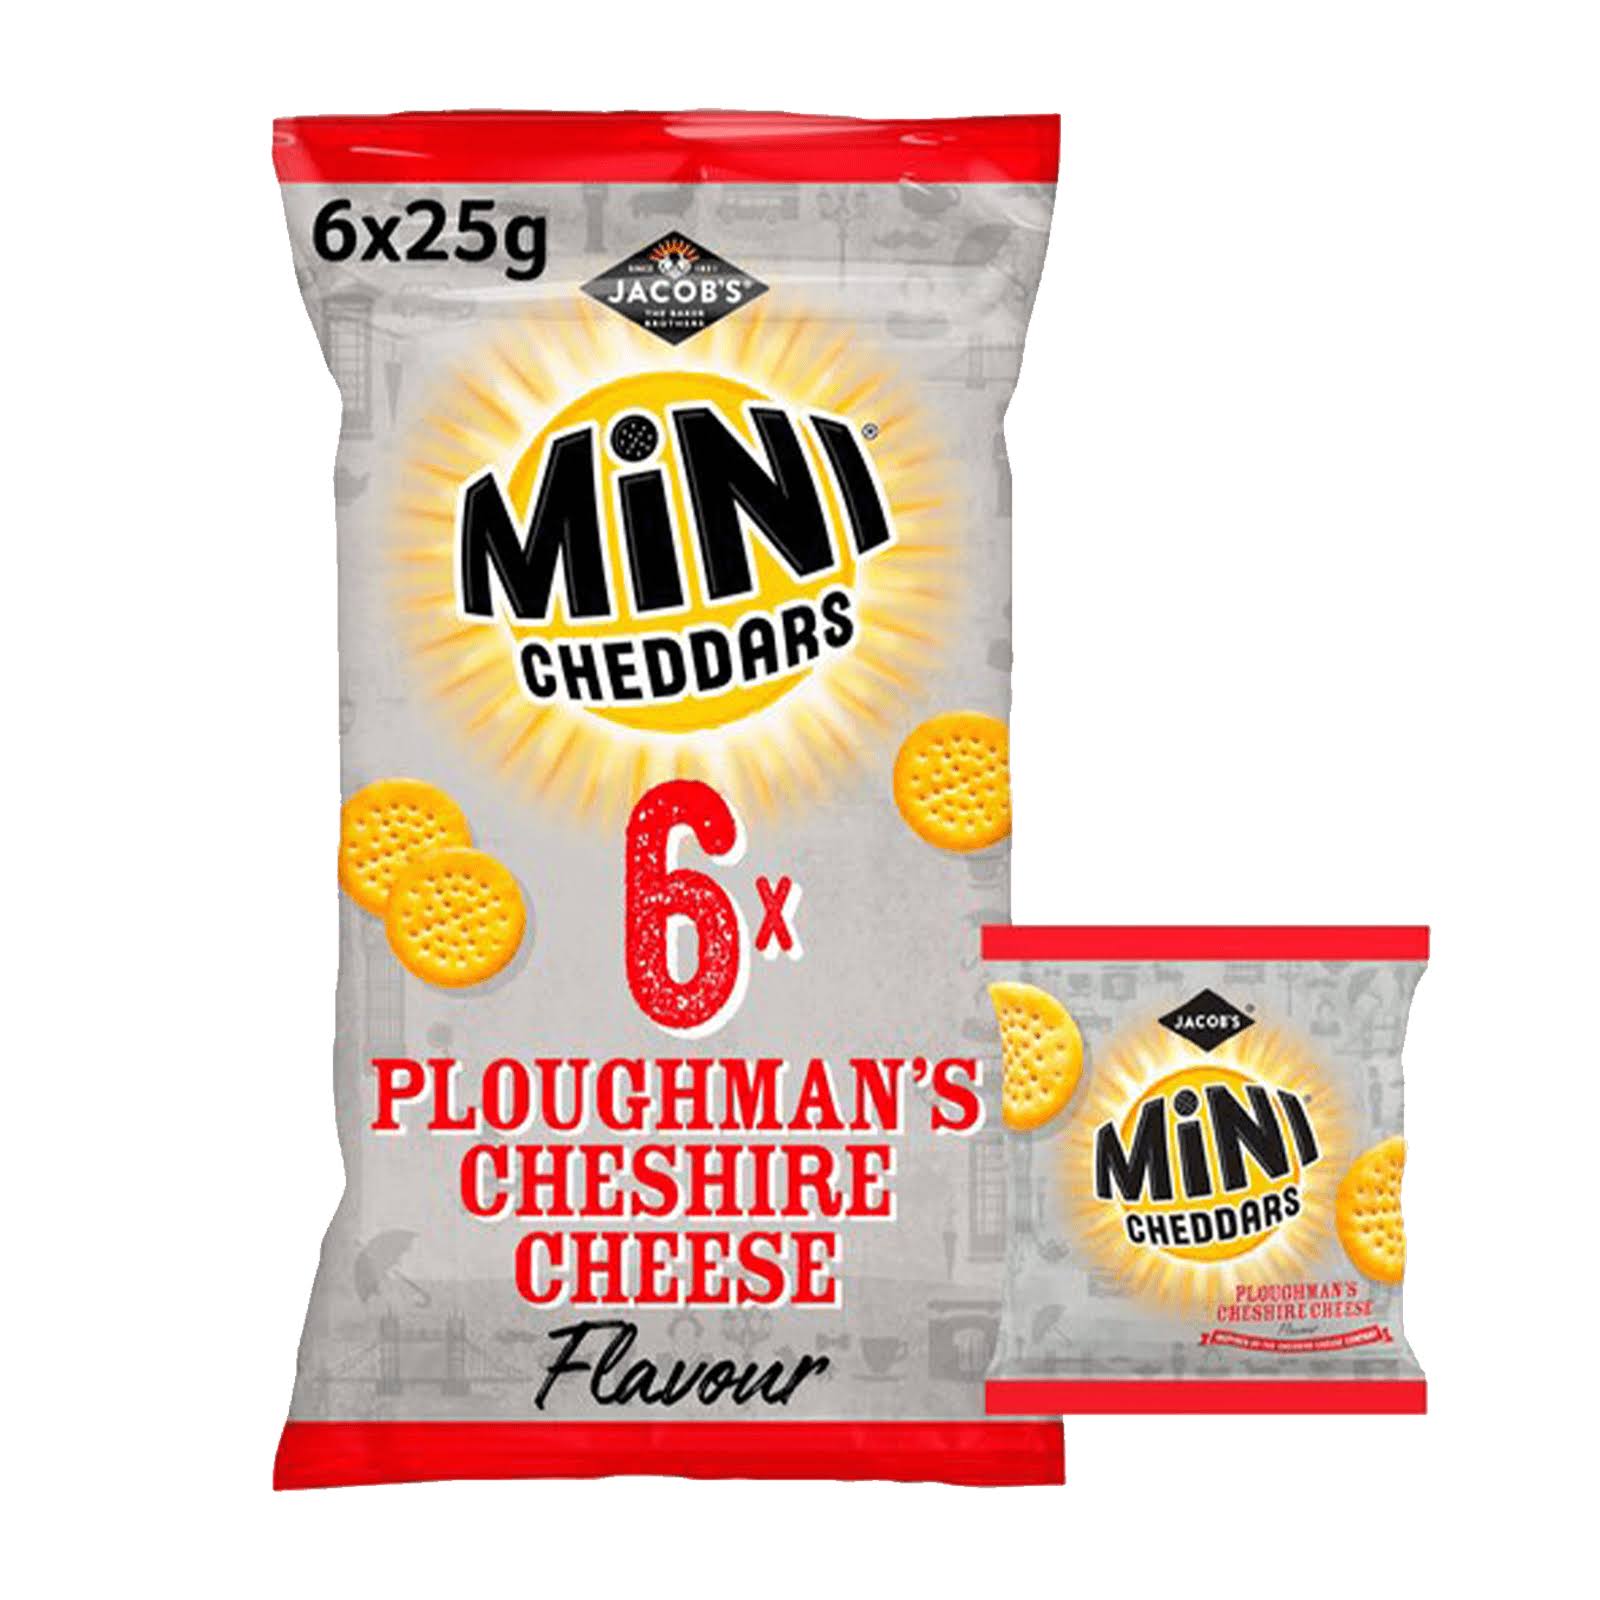 Jacobs Mini Cheddars Ploughmans Cheshire Cheese 6 Pack to Australia